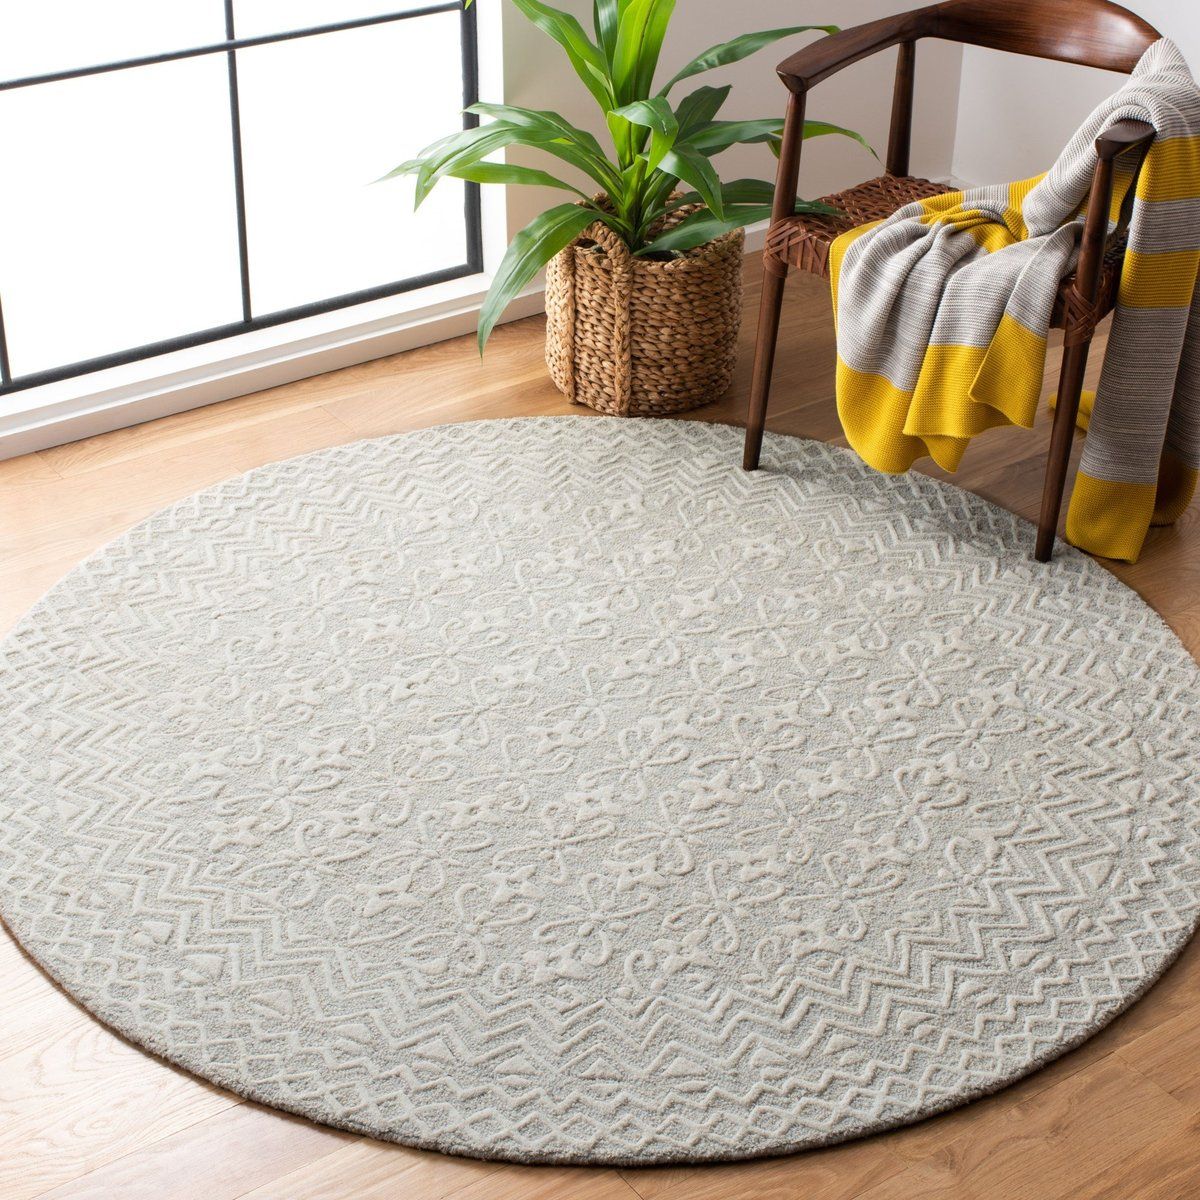 Safavieh Blossom Blm 114 Modern Wool Area Rugs | Rugs Direct Inside Blossom Oval Rugs (View 15 of 15)